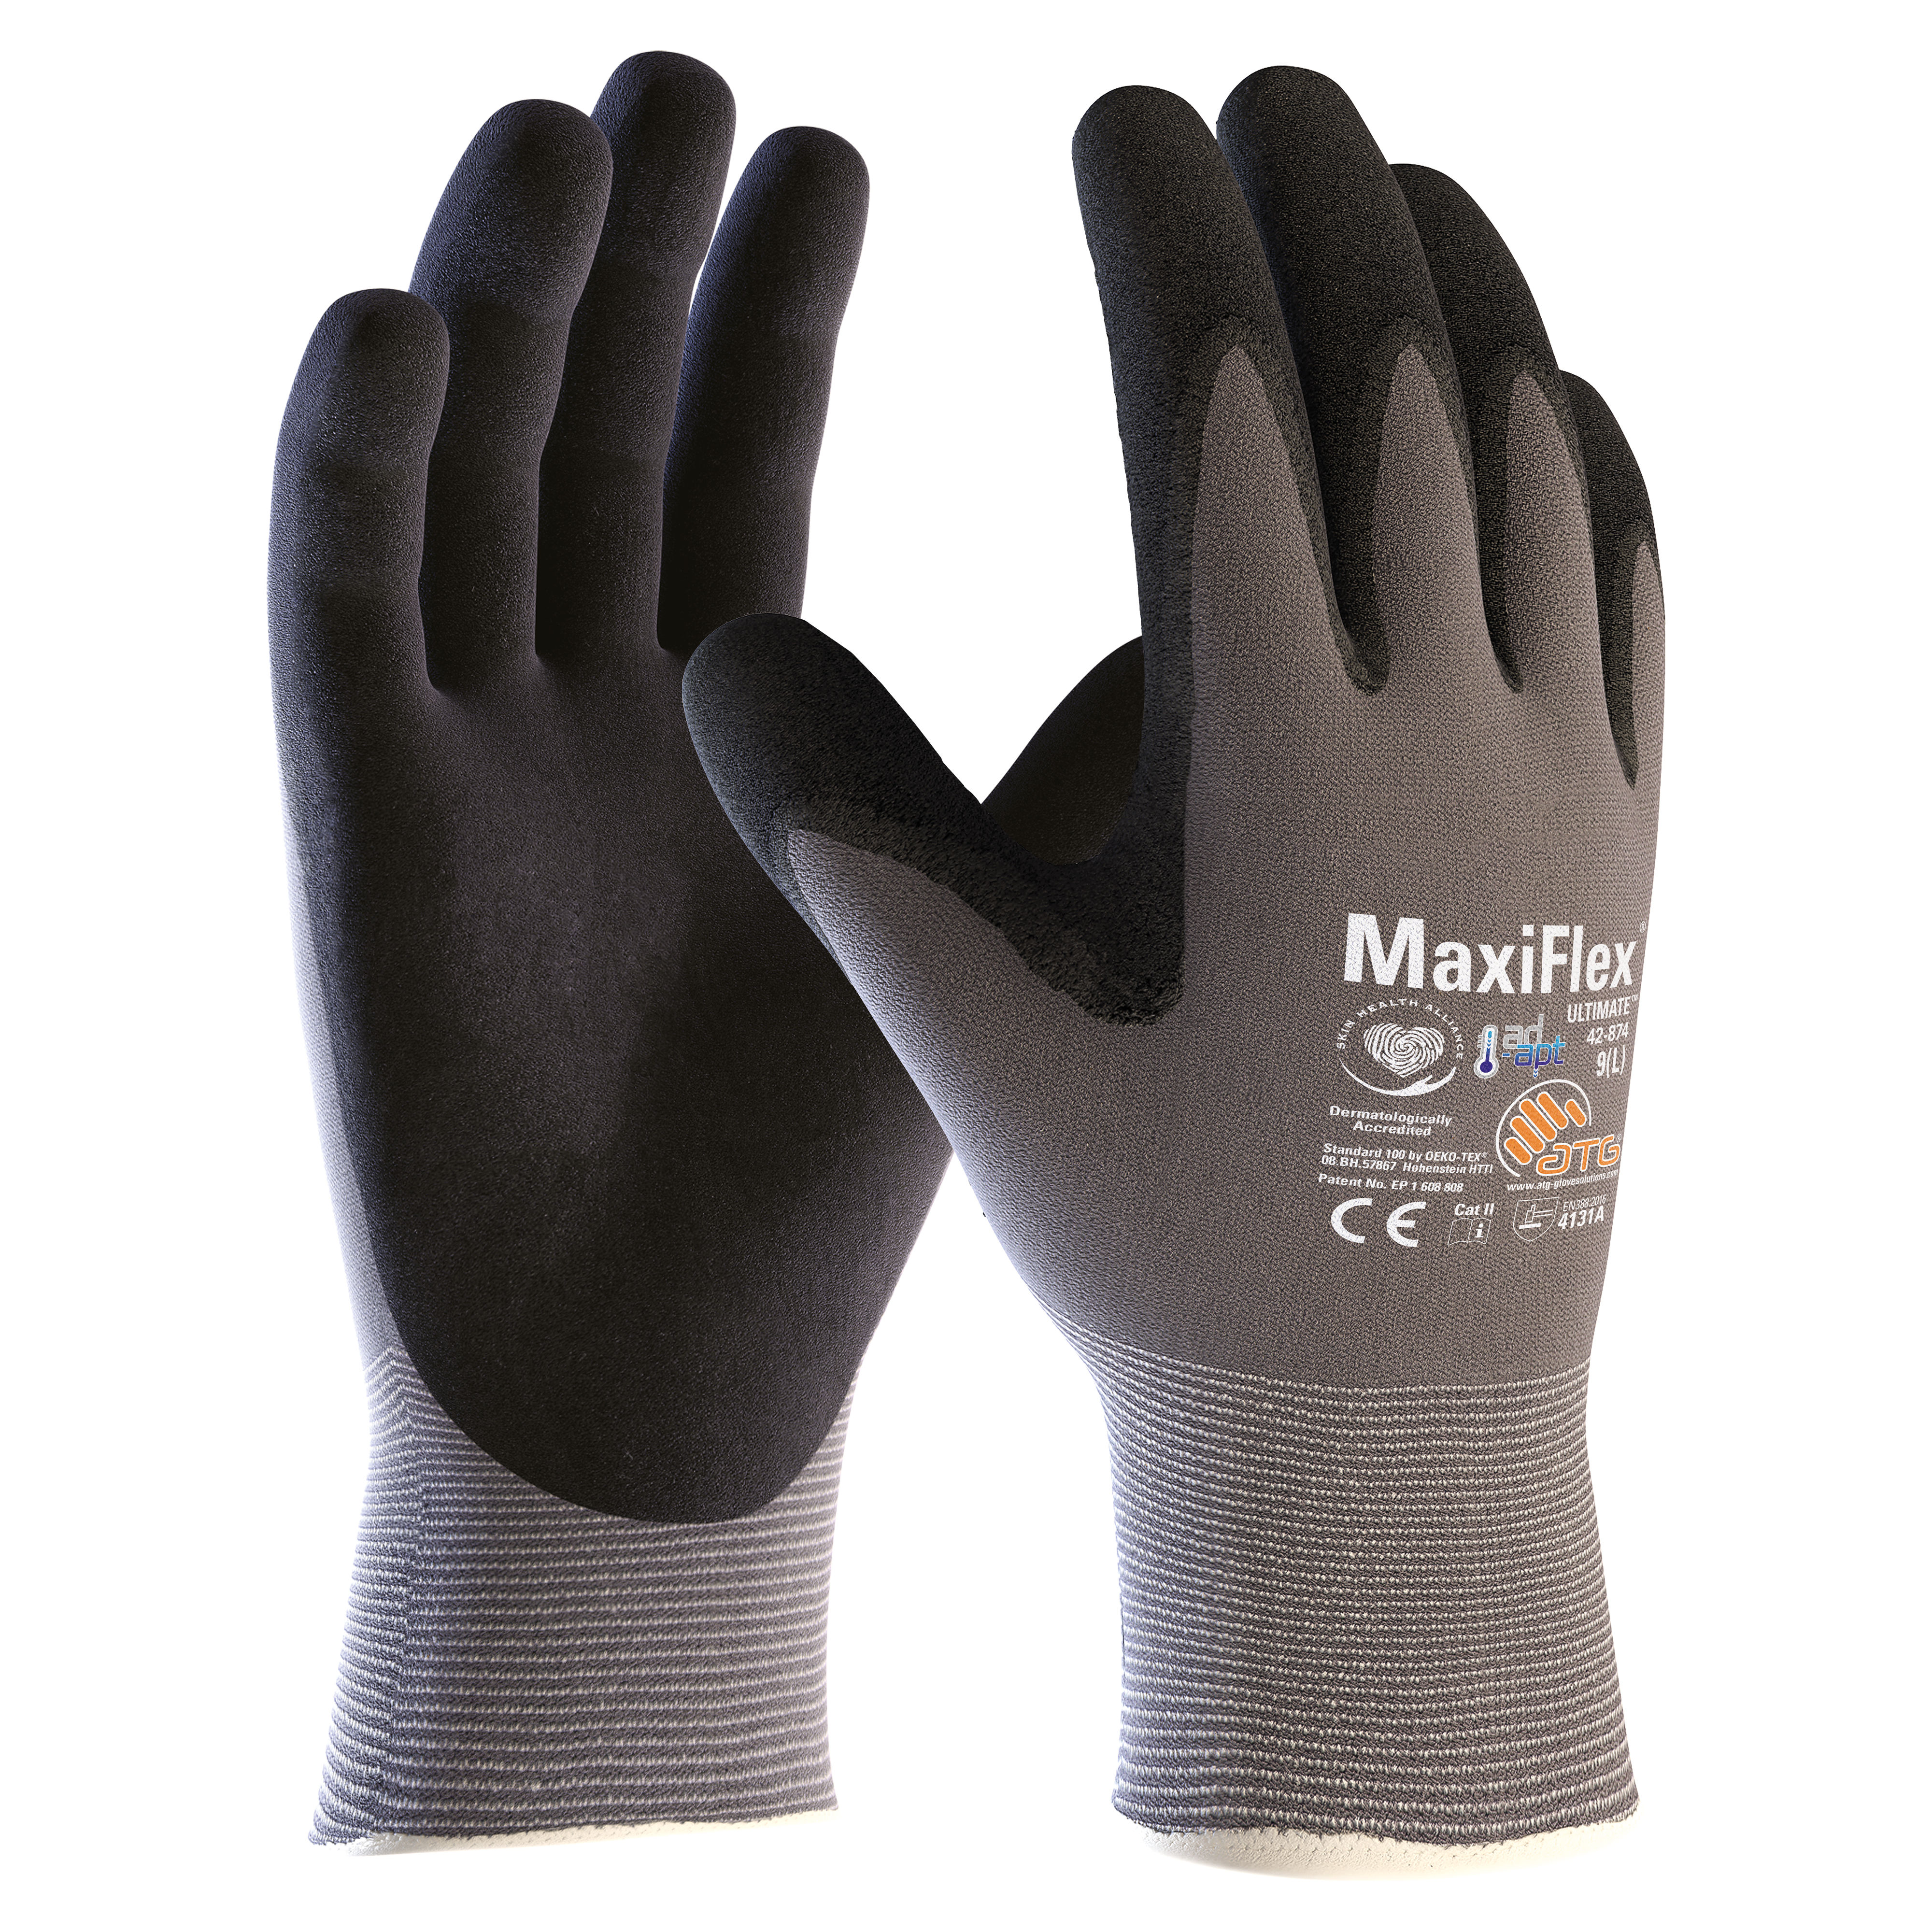 ATG MaxiFlex Ultimate AD-APT Palm Coated Knitted Wrist Work Gloves